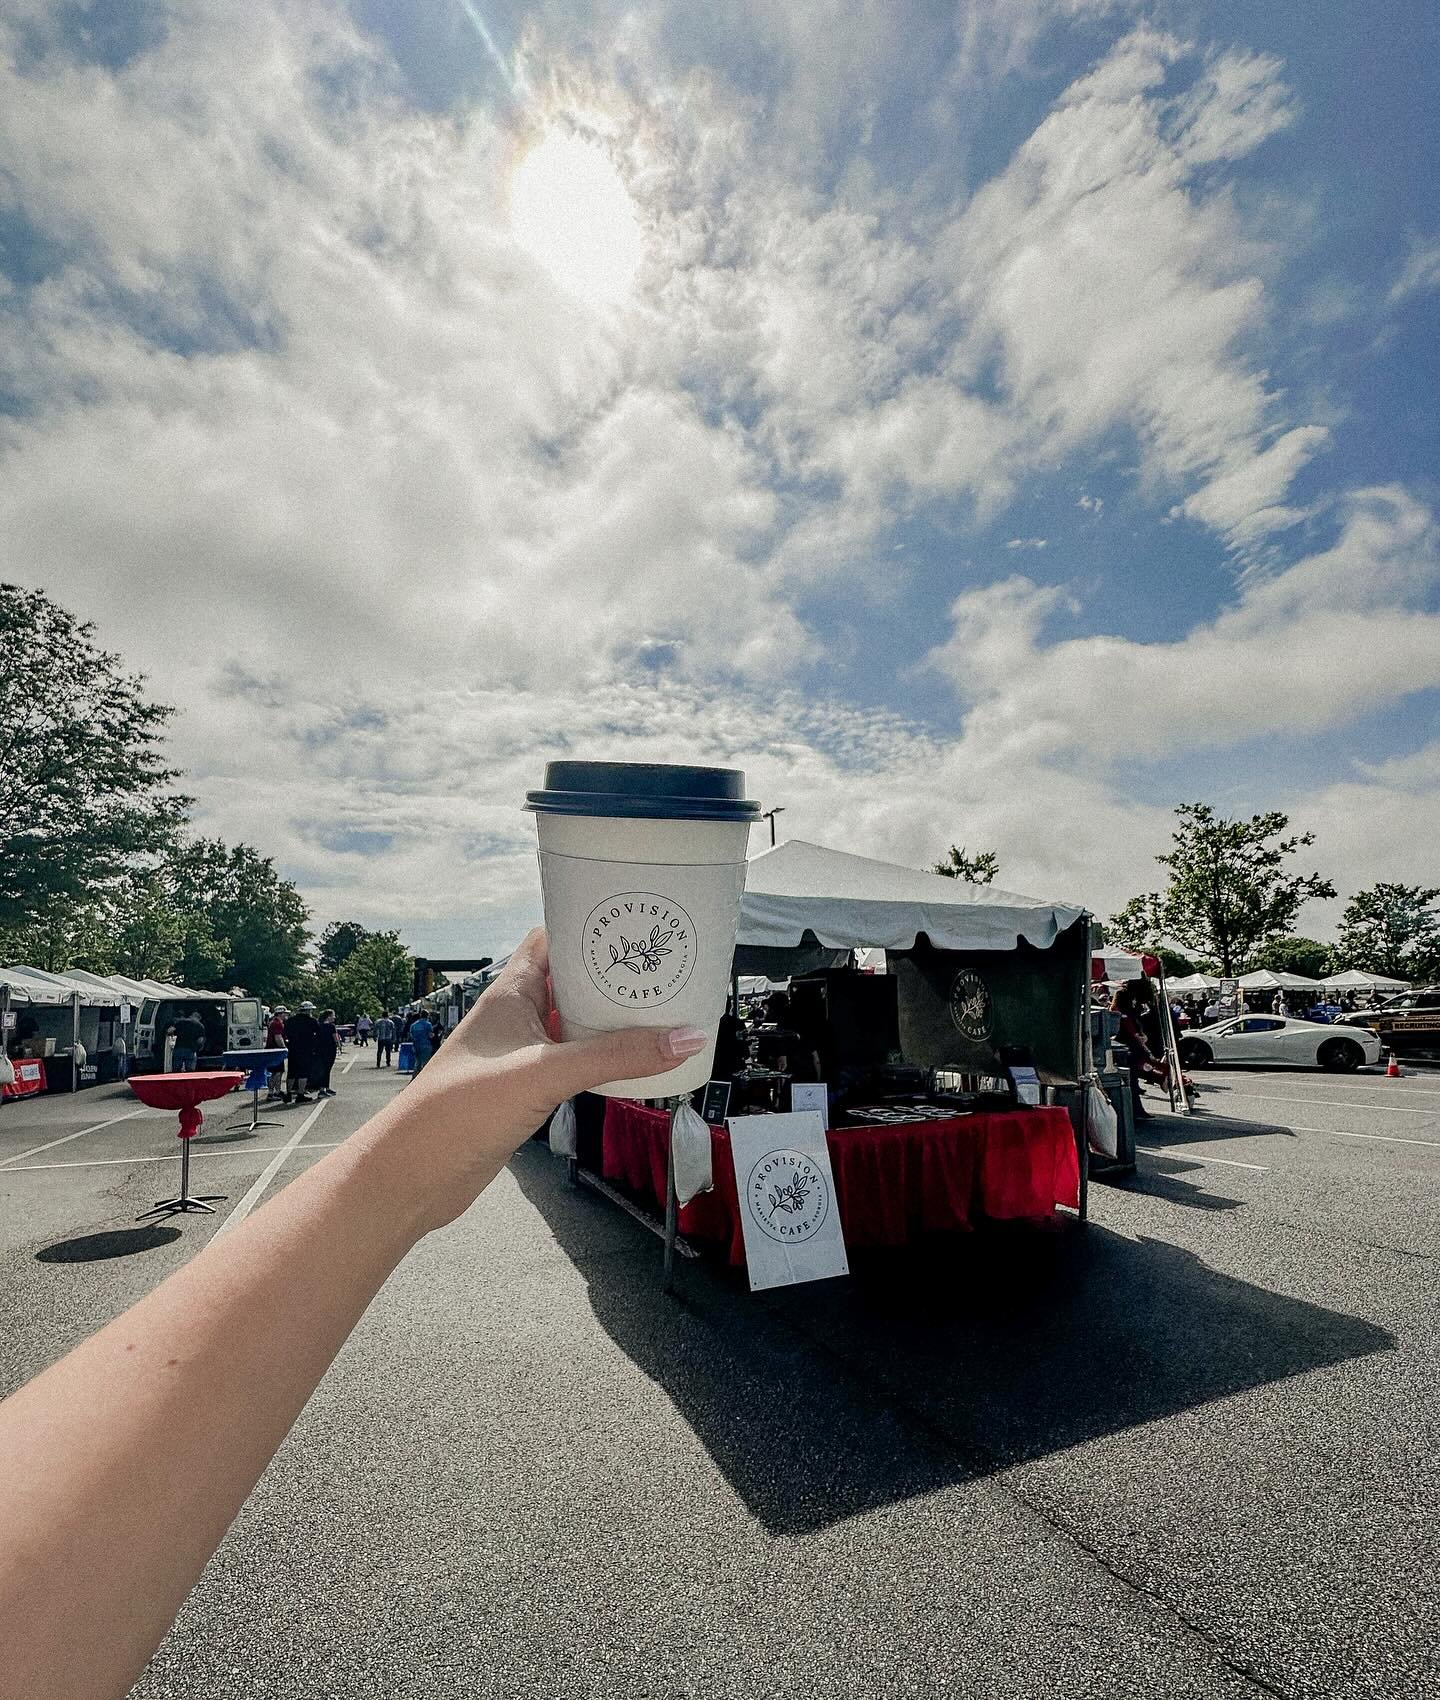 we&rsquo;re at the Taste of East Cobb today and to celebrate, we&rsquo;re doing a ✨GIVEAWAY✨
Here&rsquo;s how to enter: 👇

1. Like and save this post
2. Follow this account ( @provisioncafe )
3. Tag two friends who would love to grab coffee with you